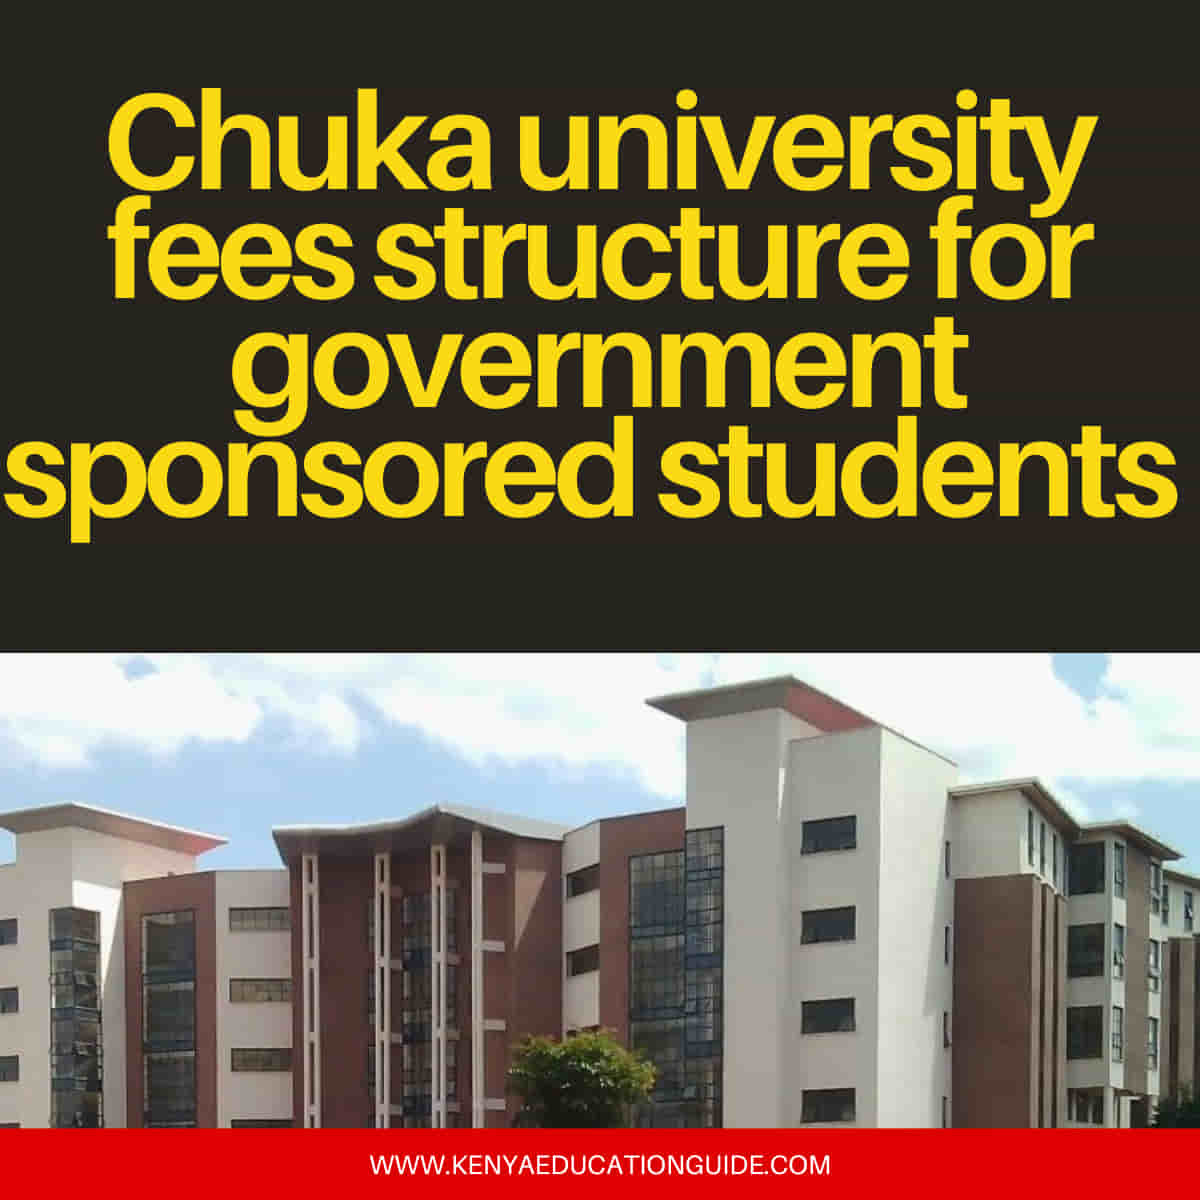 Chuka university fees structure for government sponsored students